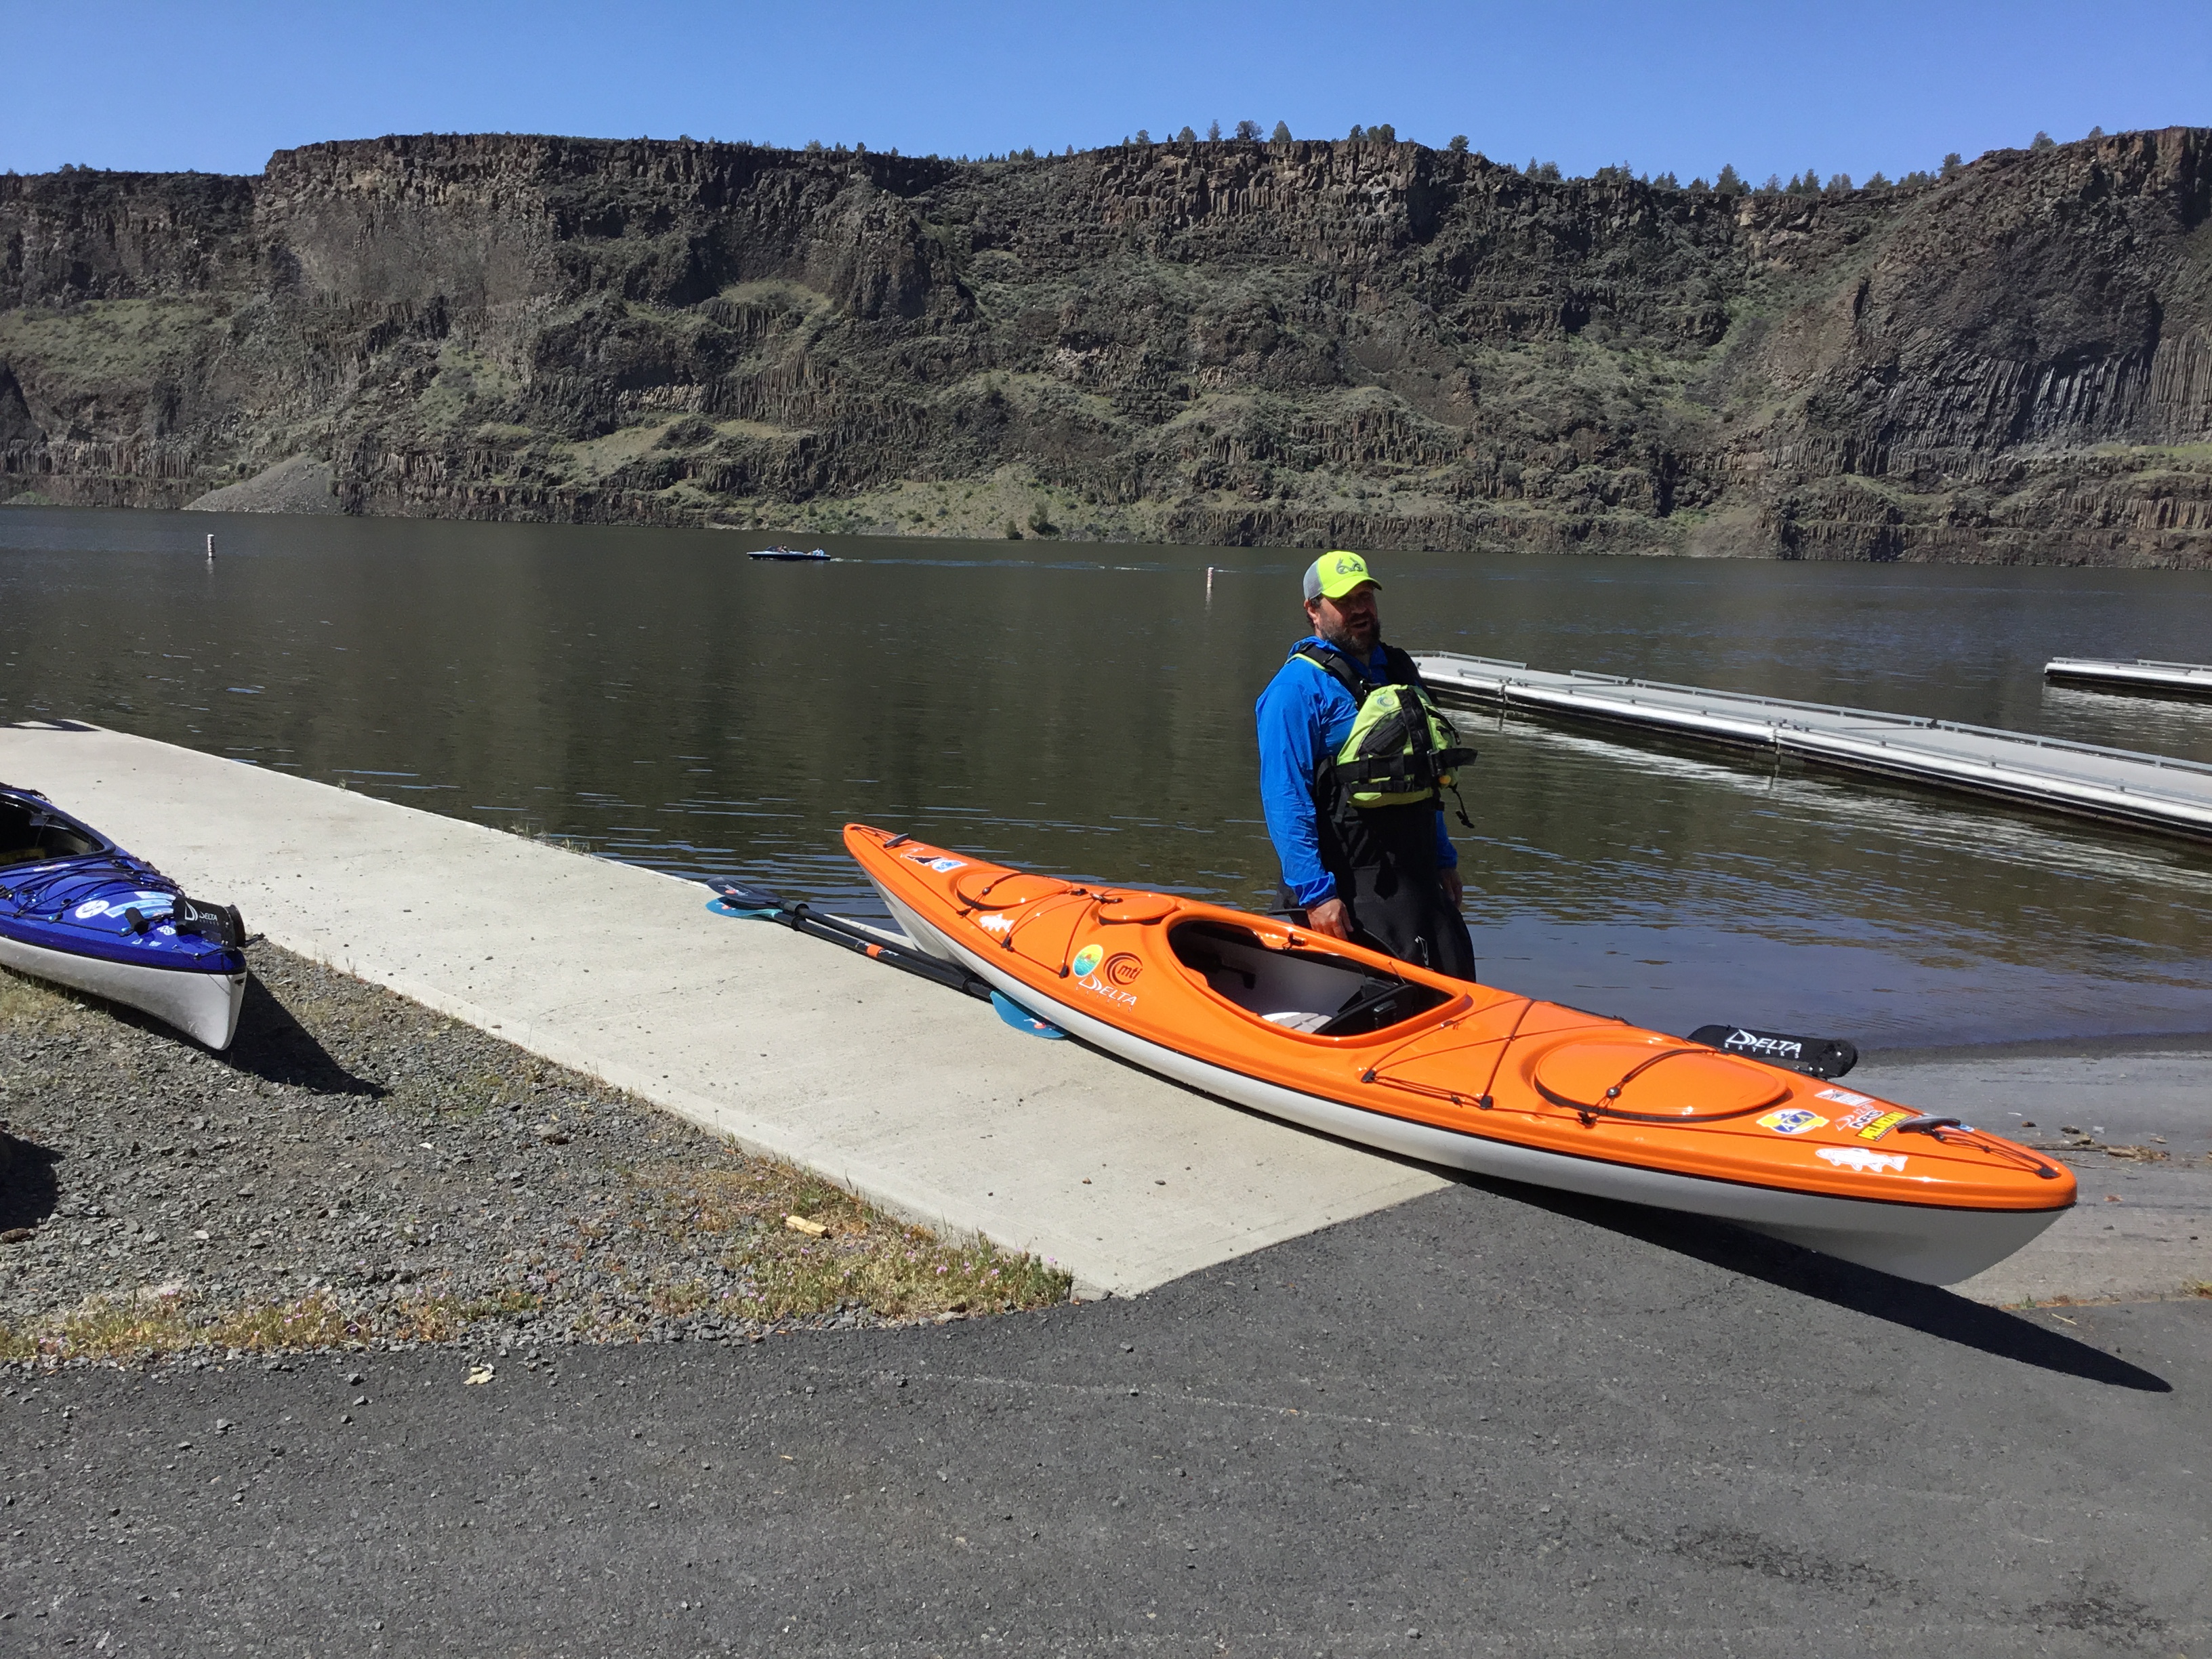 Kayaker preparing to launch when no other trailered boats are launching